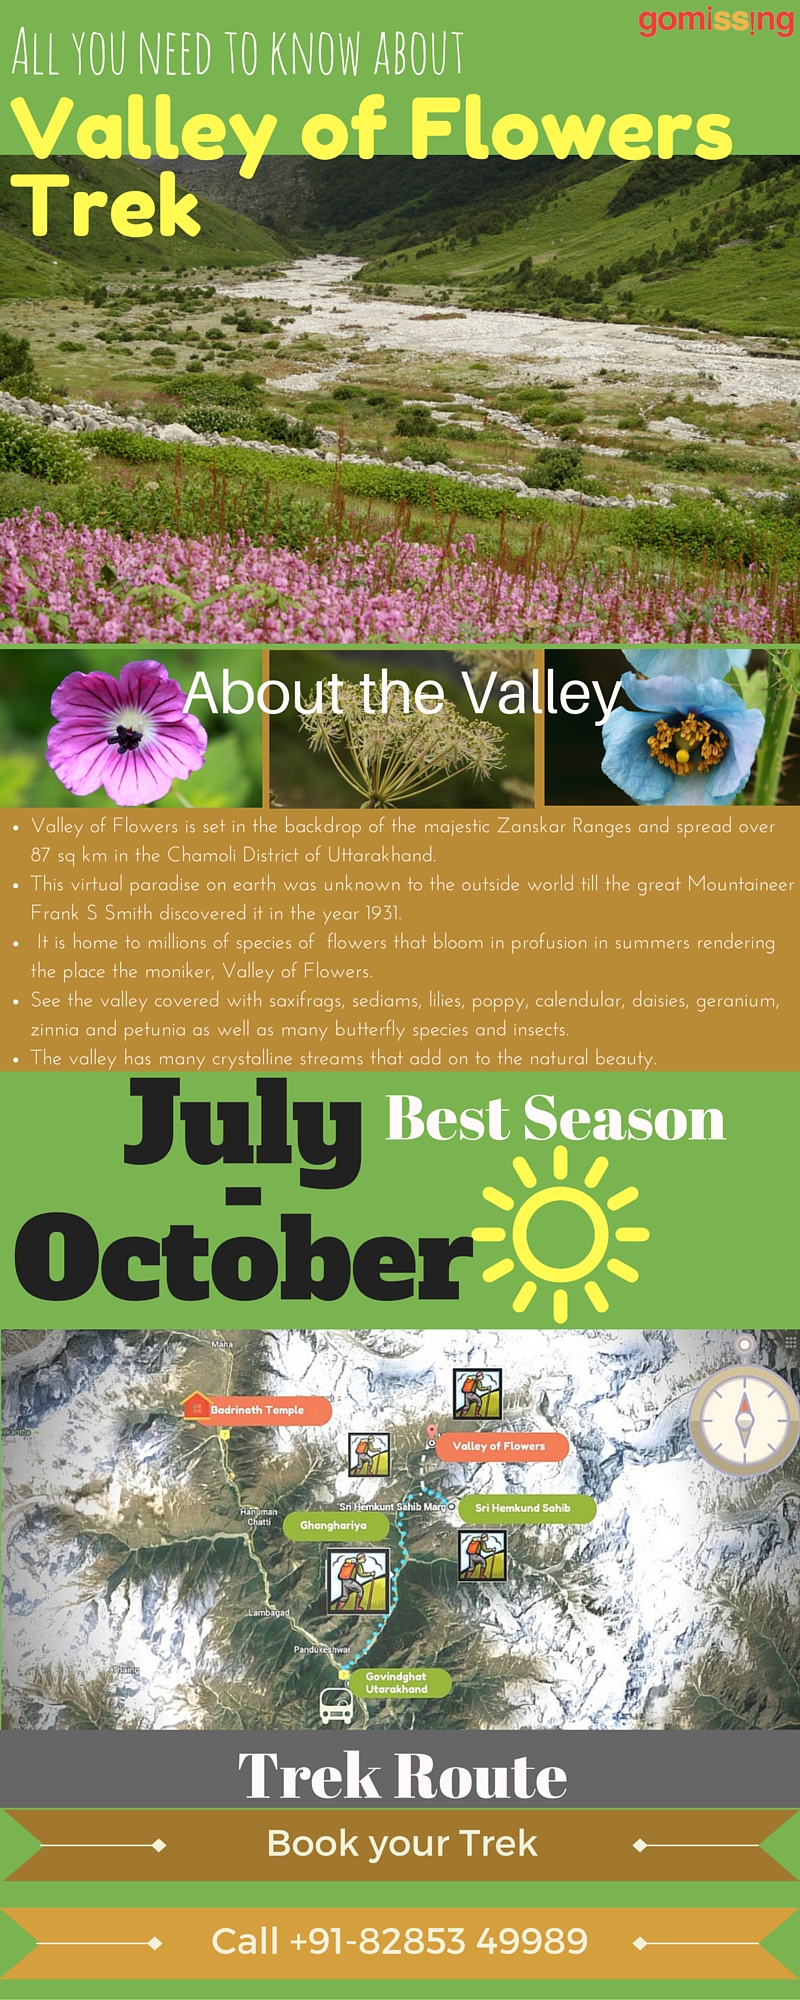 Valley of Flowers Infographic